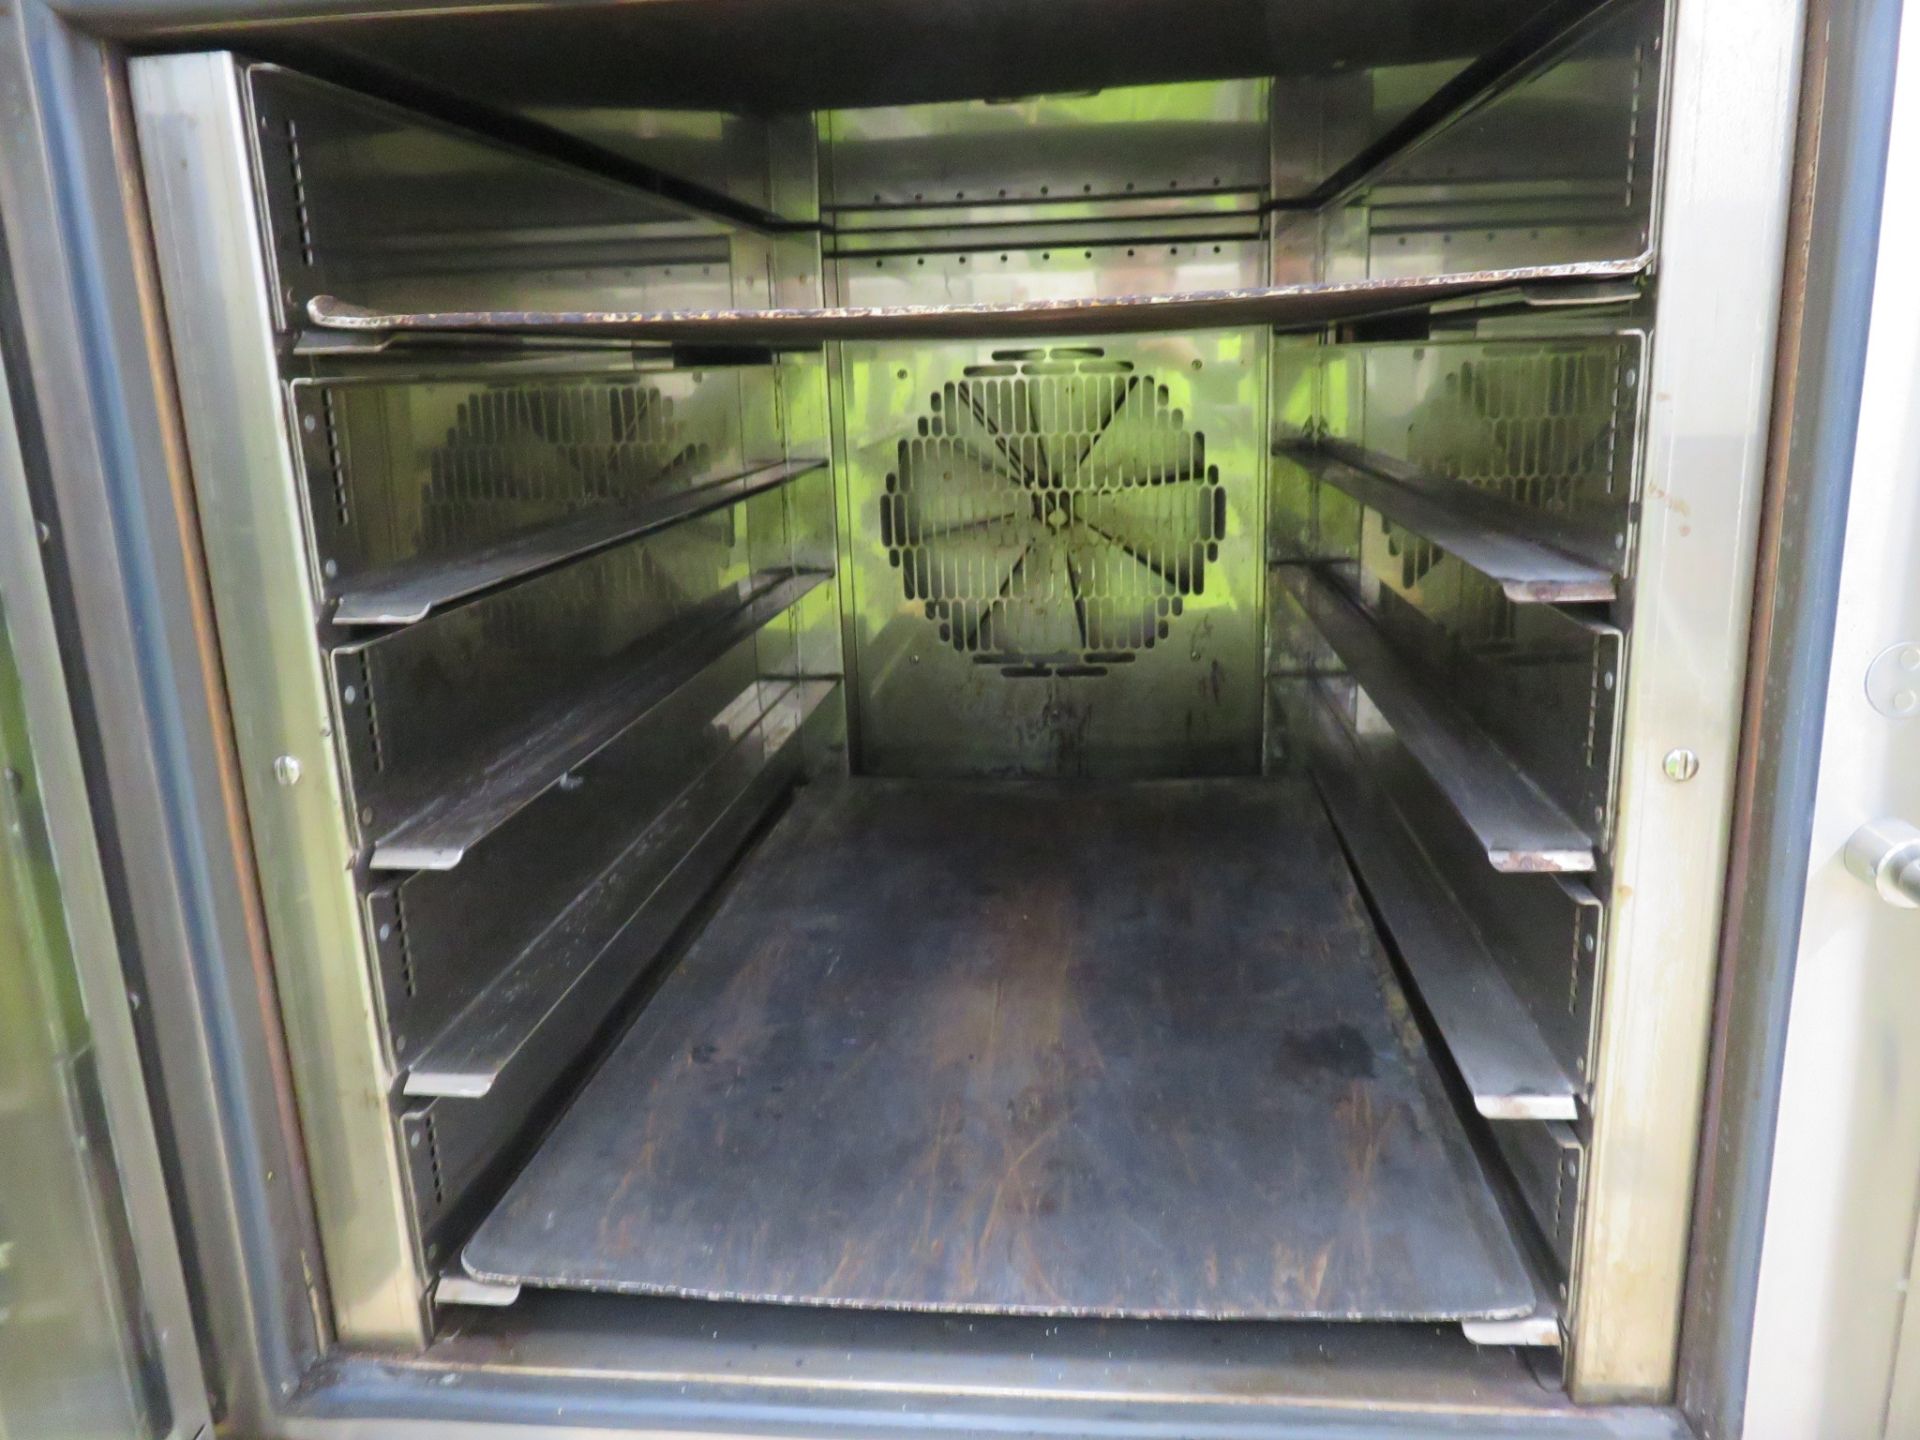 TOM CHANDLEY CONVECTA TC-5 OVEN. - Image 2 of 4